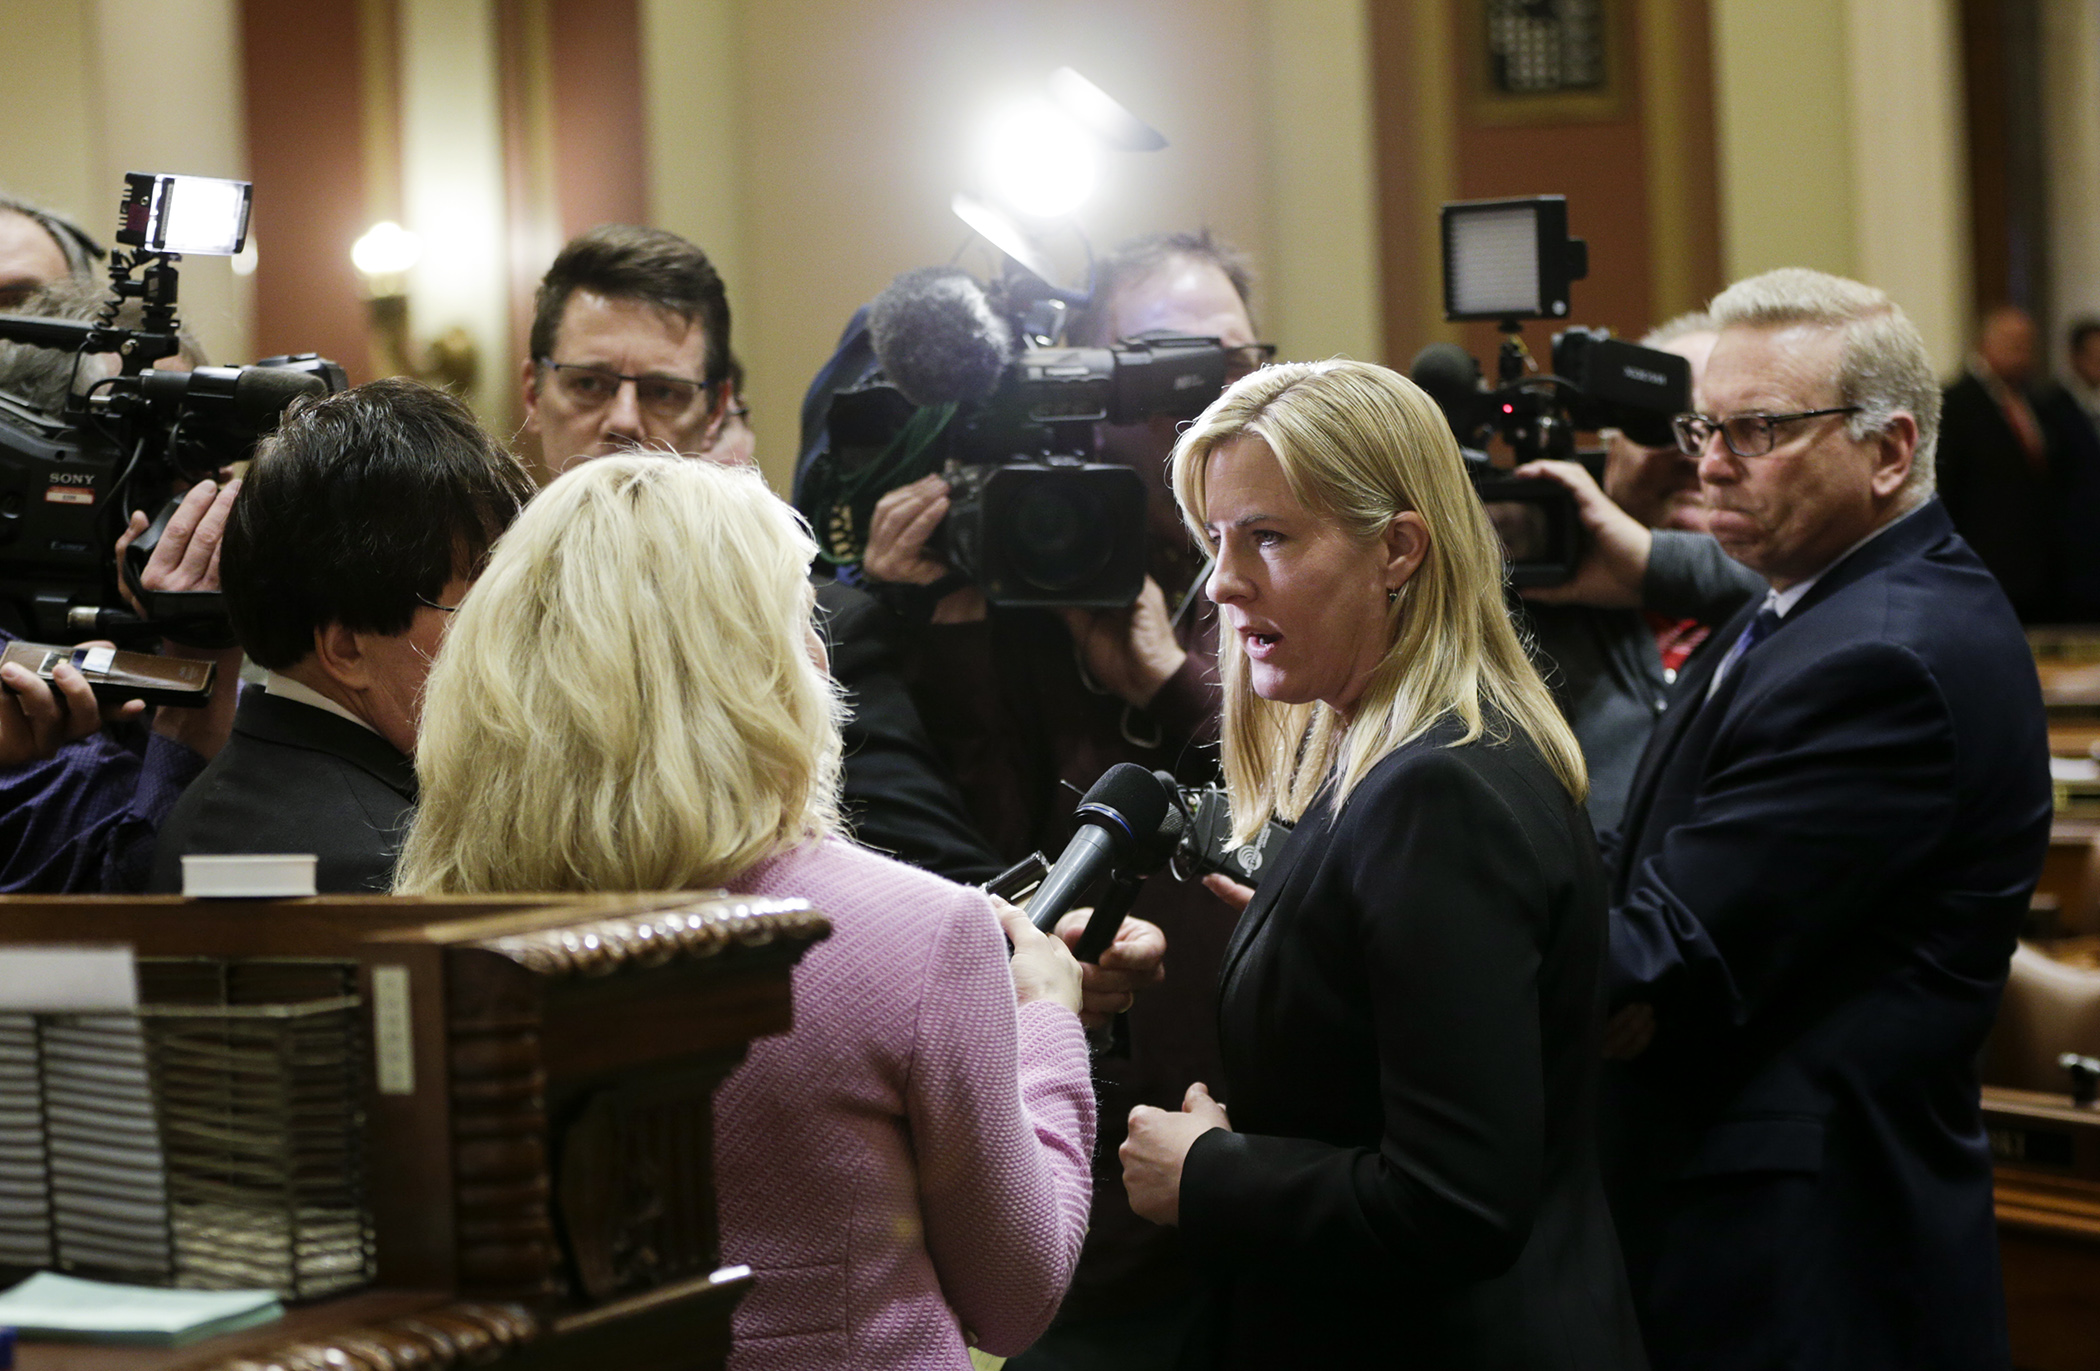 House Minority Leader Melissa Hortman, center, meets with members of the media on the House Floor April 18. Photo by Paul Battaglia